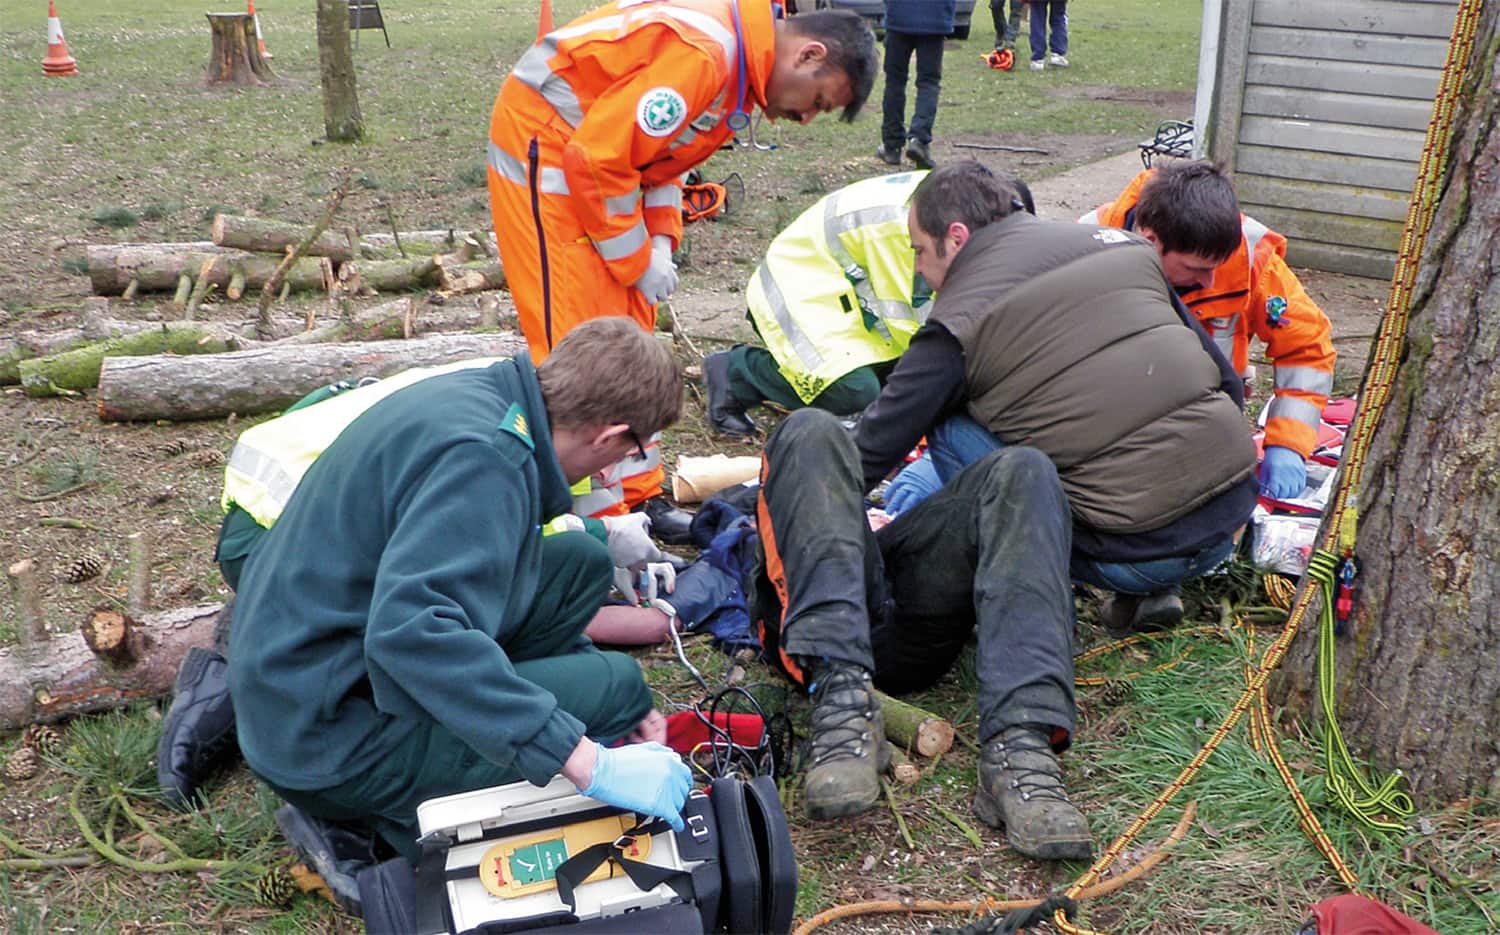 First Aid being administered to an injured arborist